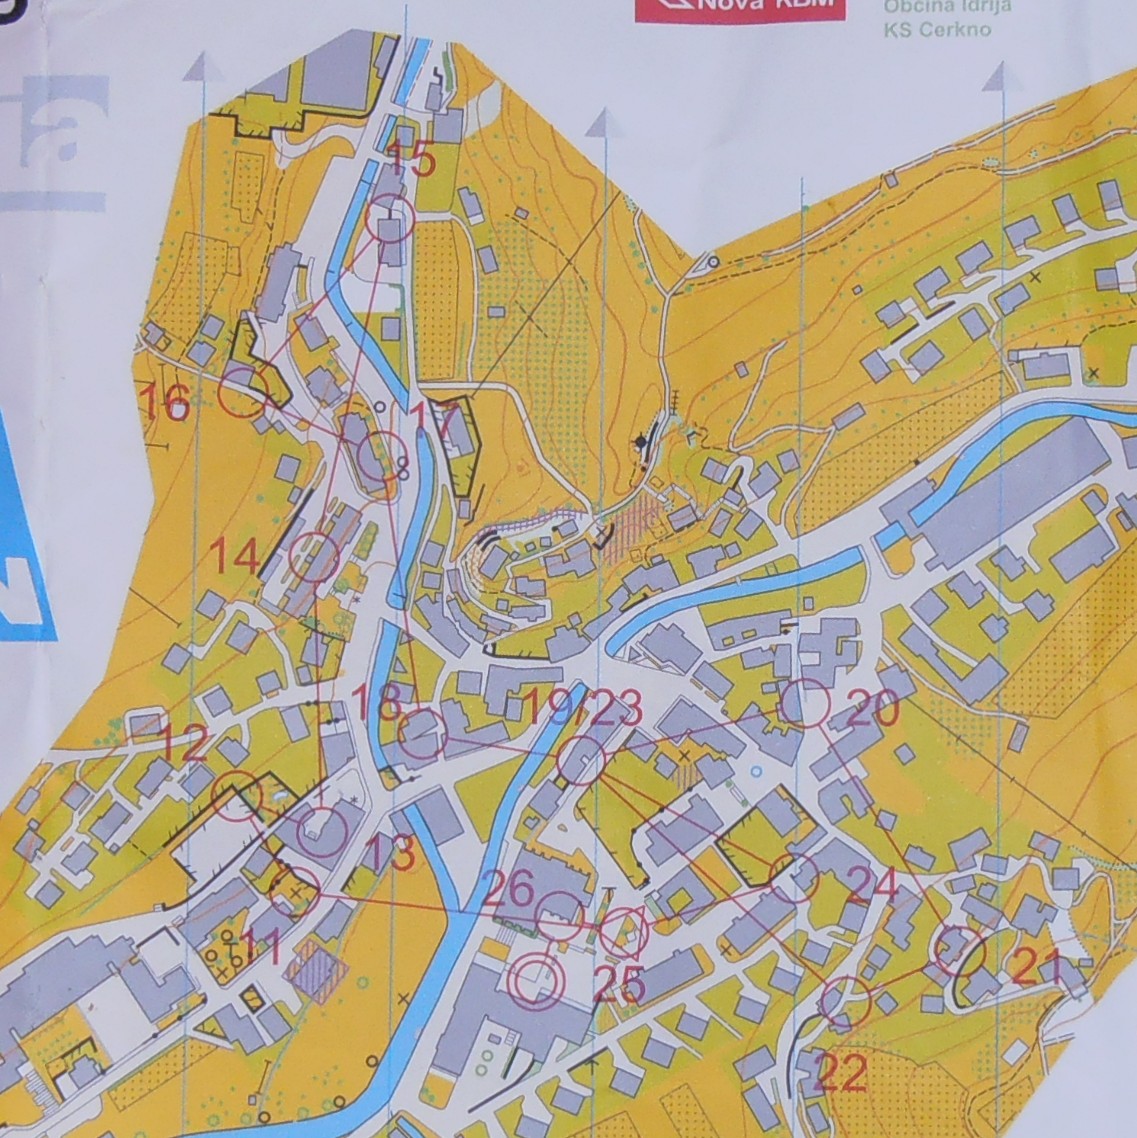 Cerkno Cup Sprint Map2 (18/08/2012)